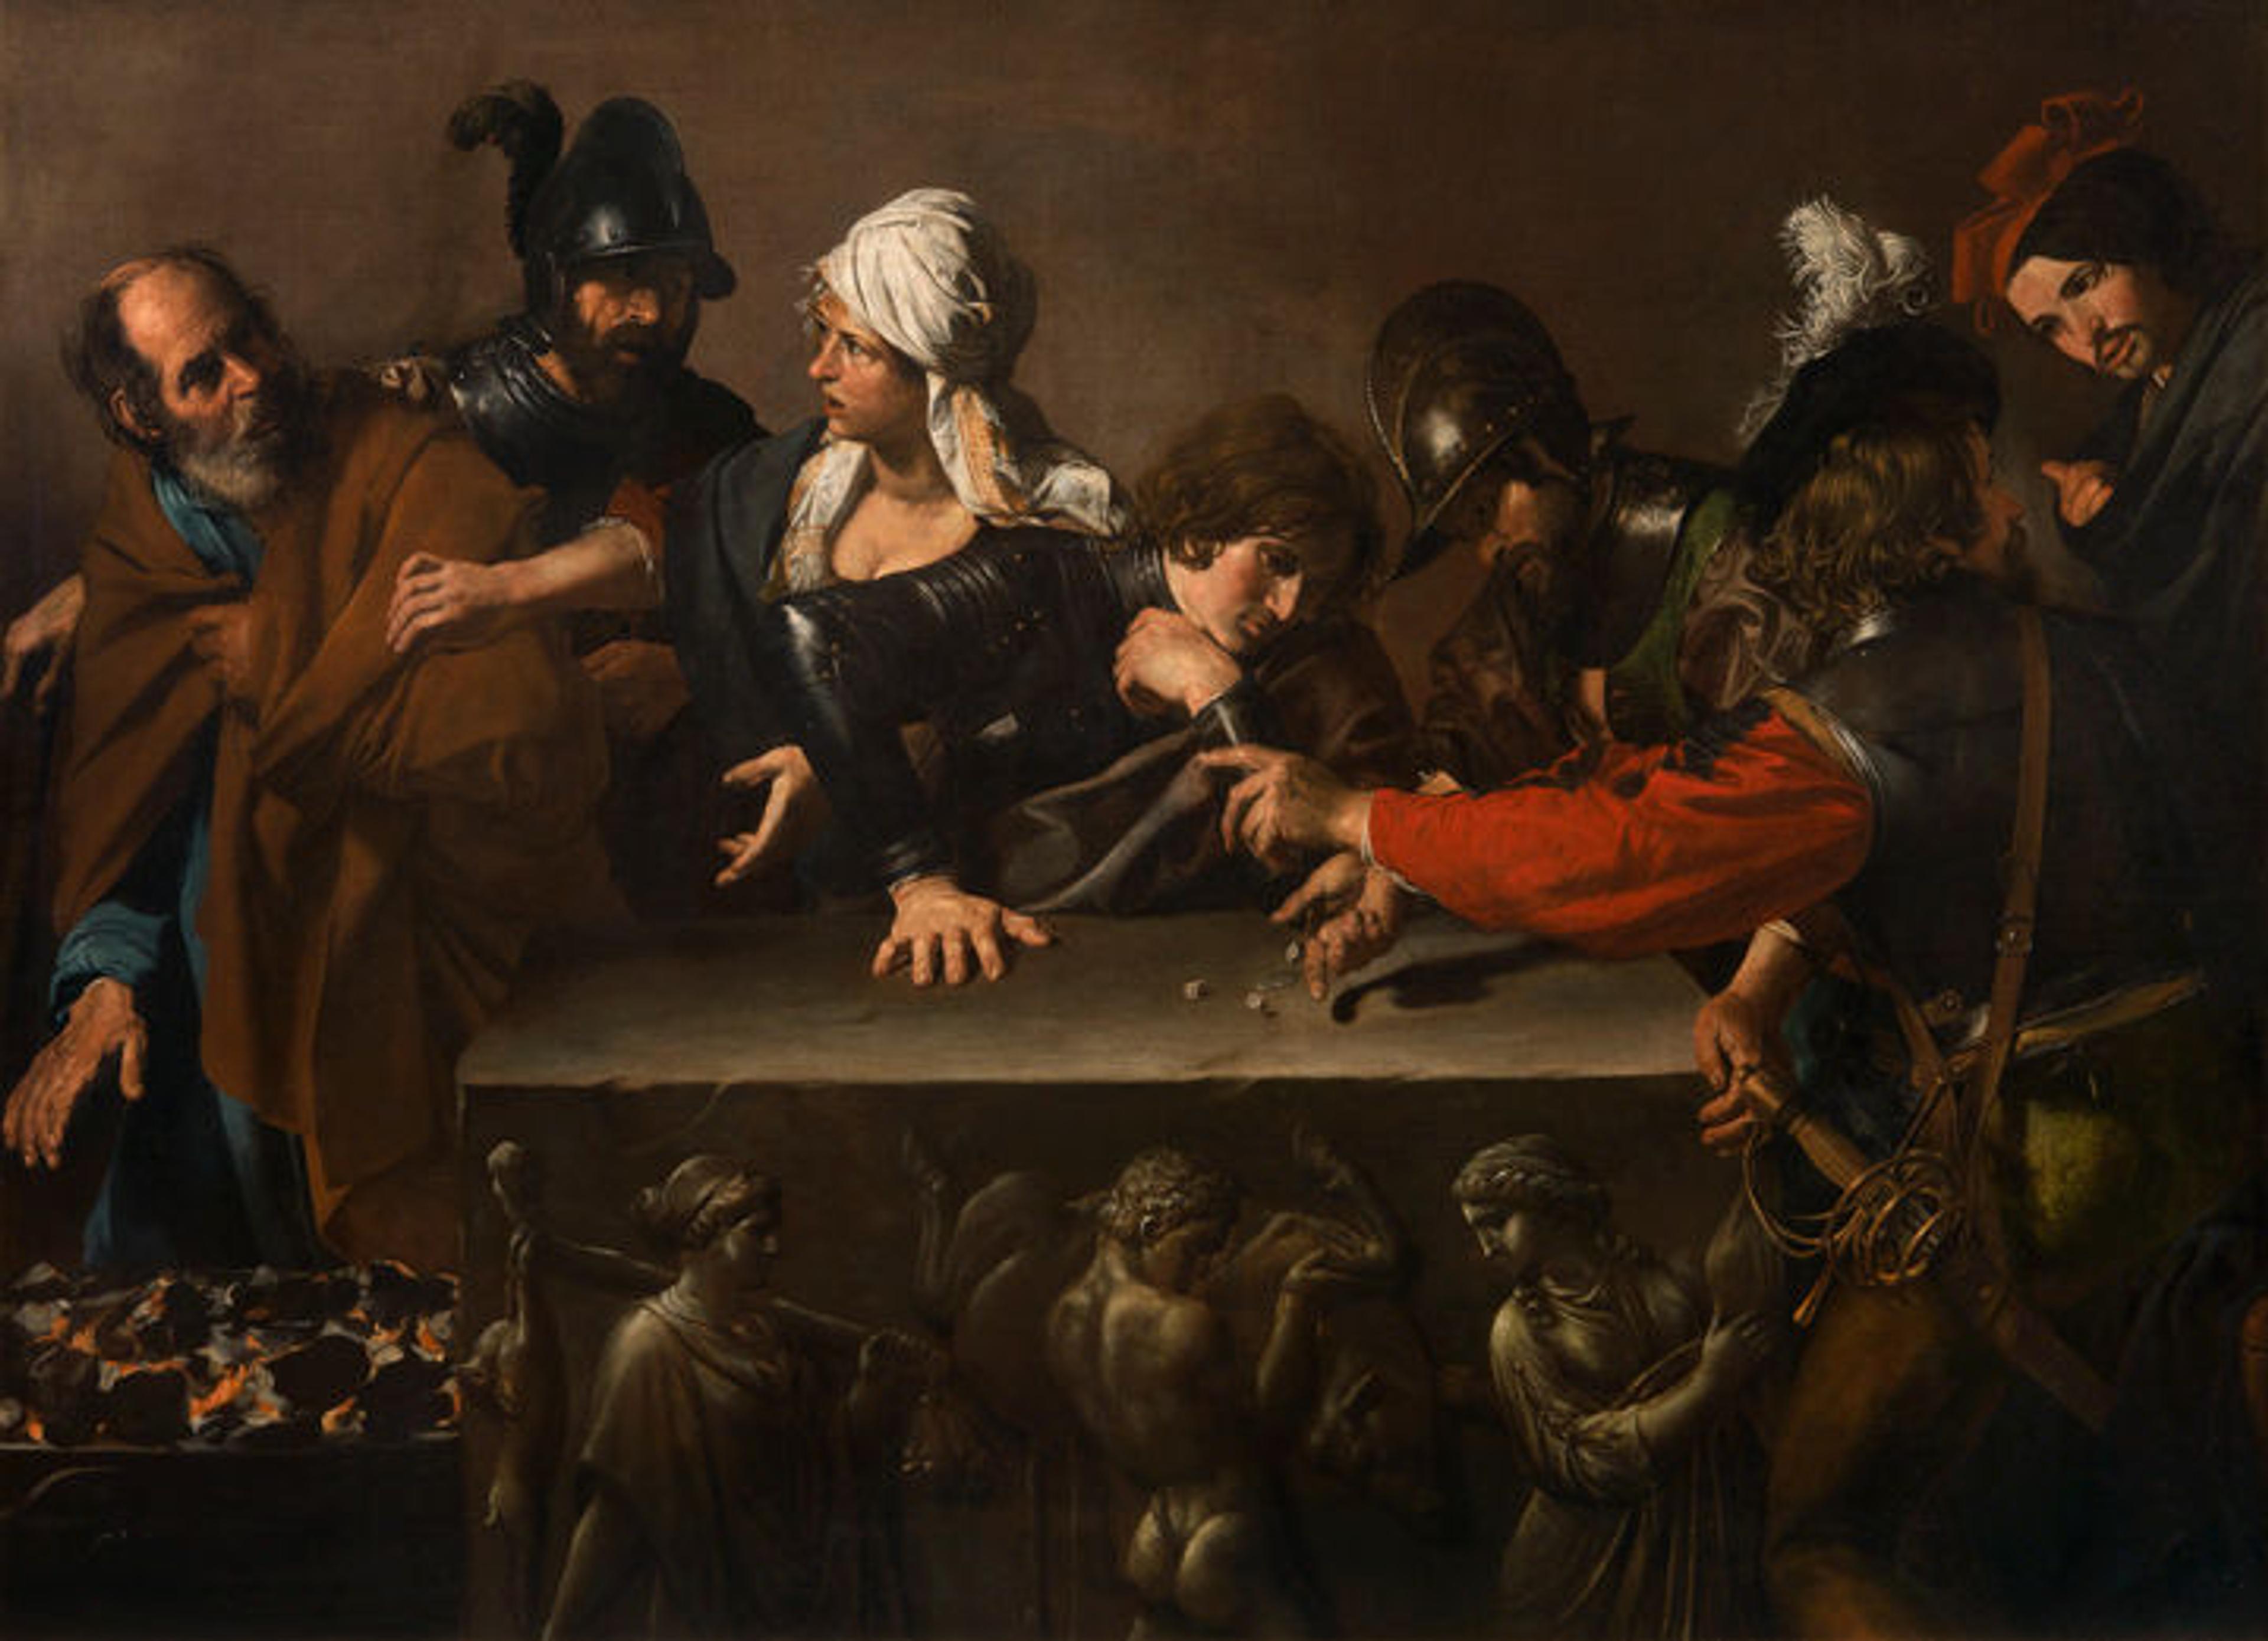 A Baroque oil painting depicting an elderly Saint Paul being dragged away by a policeman while men located elsewhere in the painting play a dice game